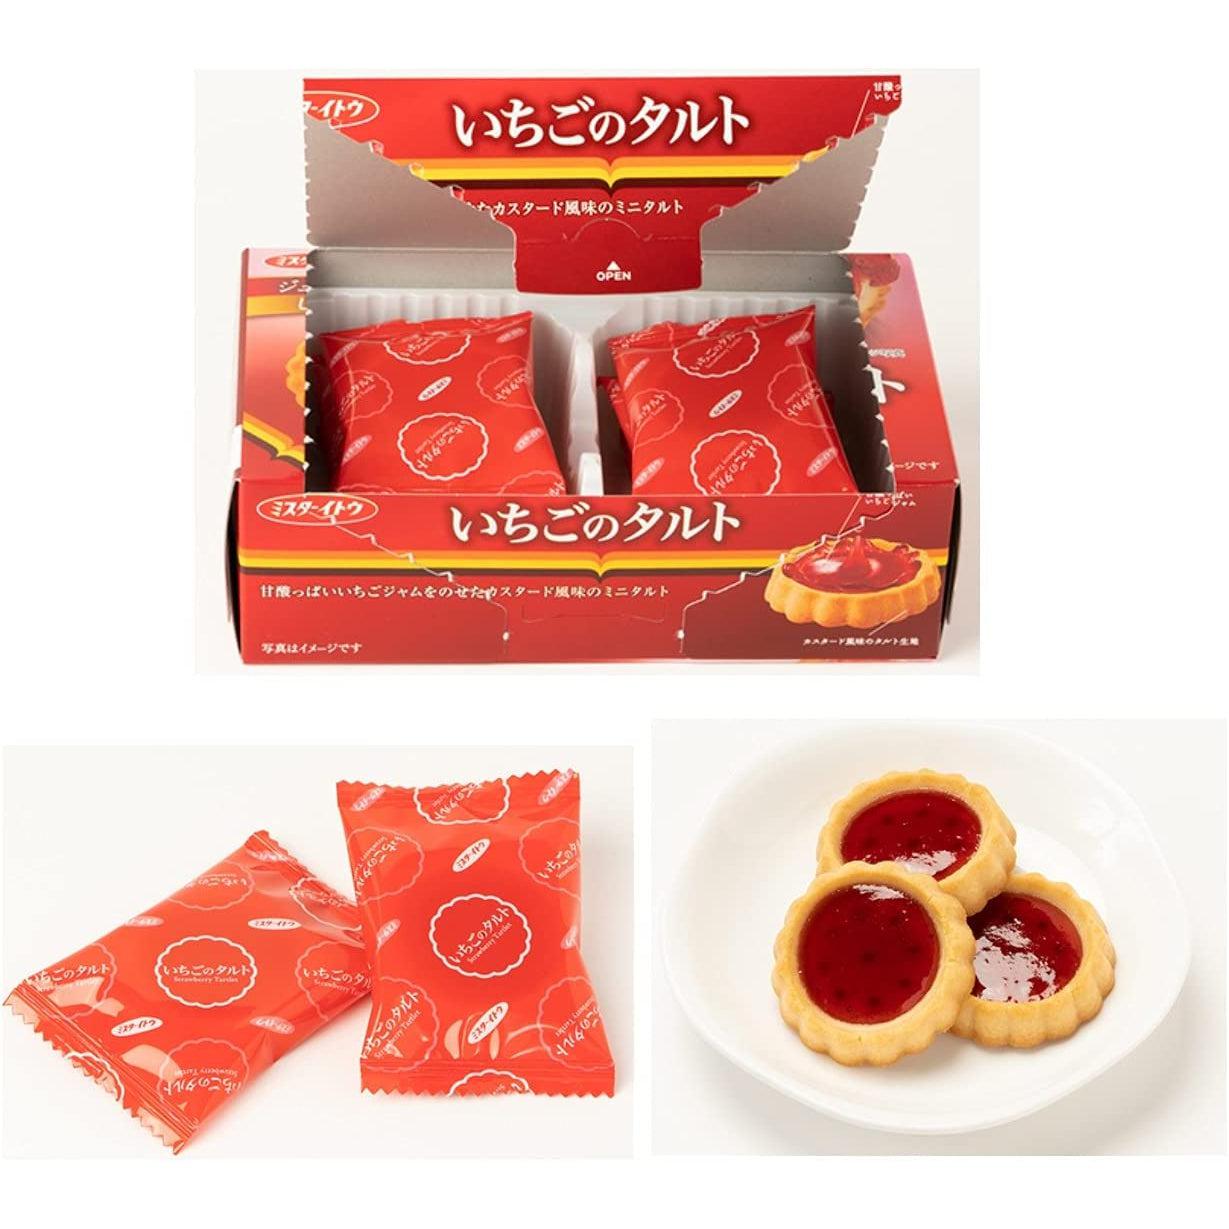 Mr. Ito Bite Sized Strawberry Tart Snack 8 Pieces (Pack of 3)